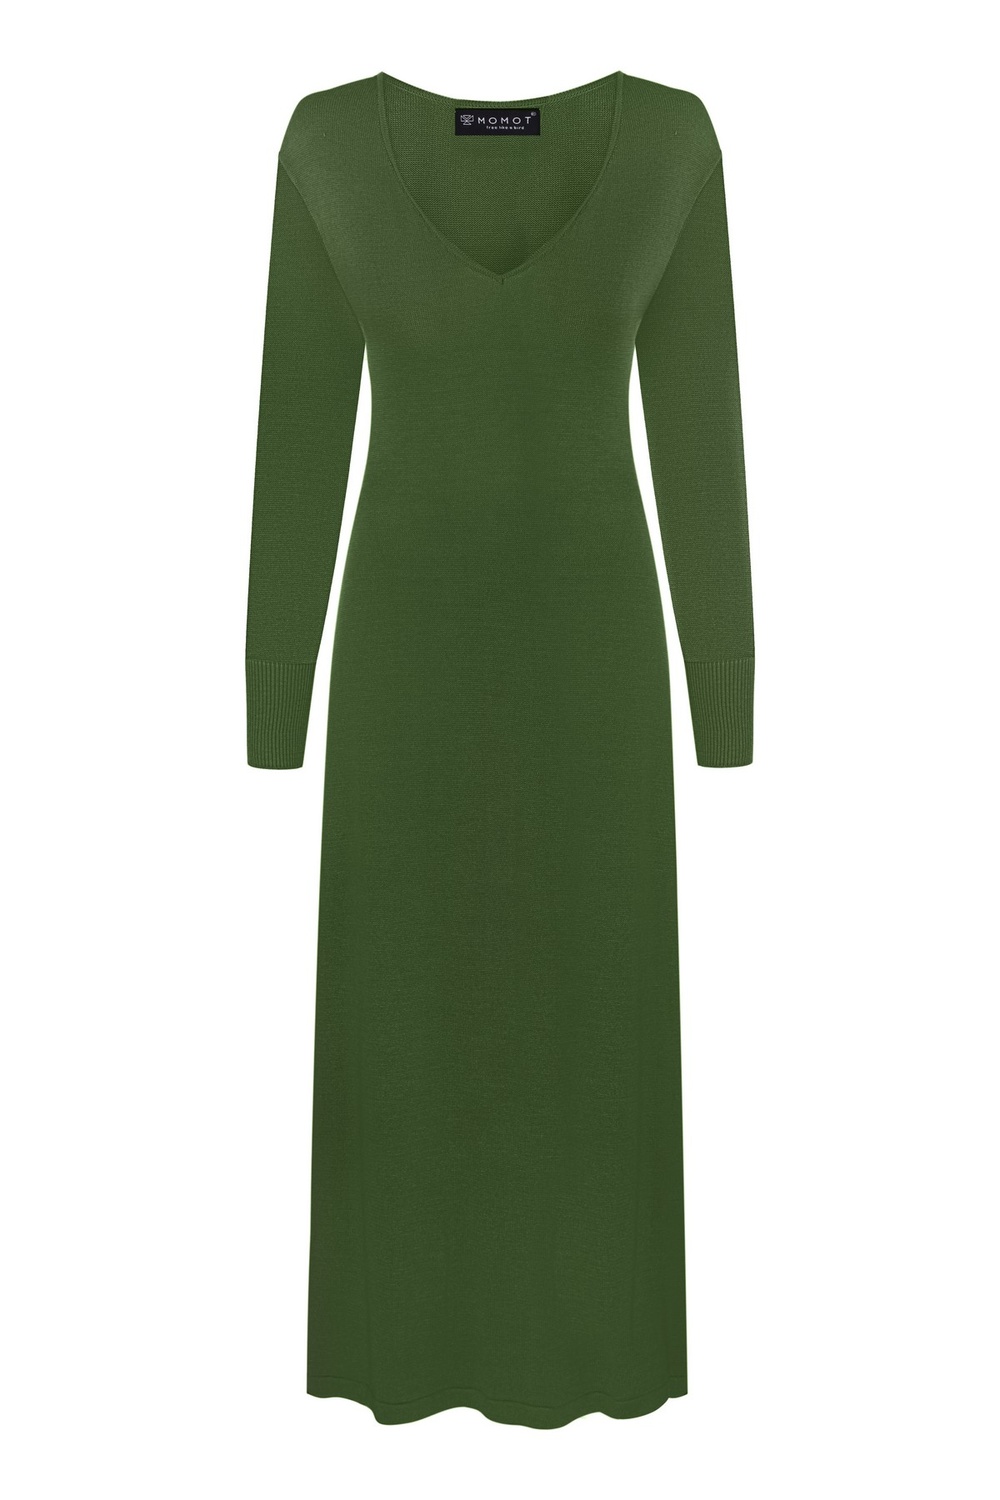 Dress knitted with V neckline made of polyviscose